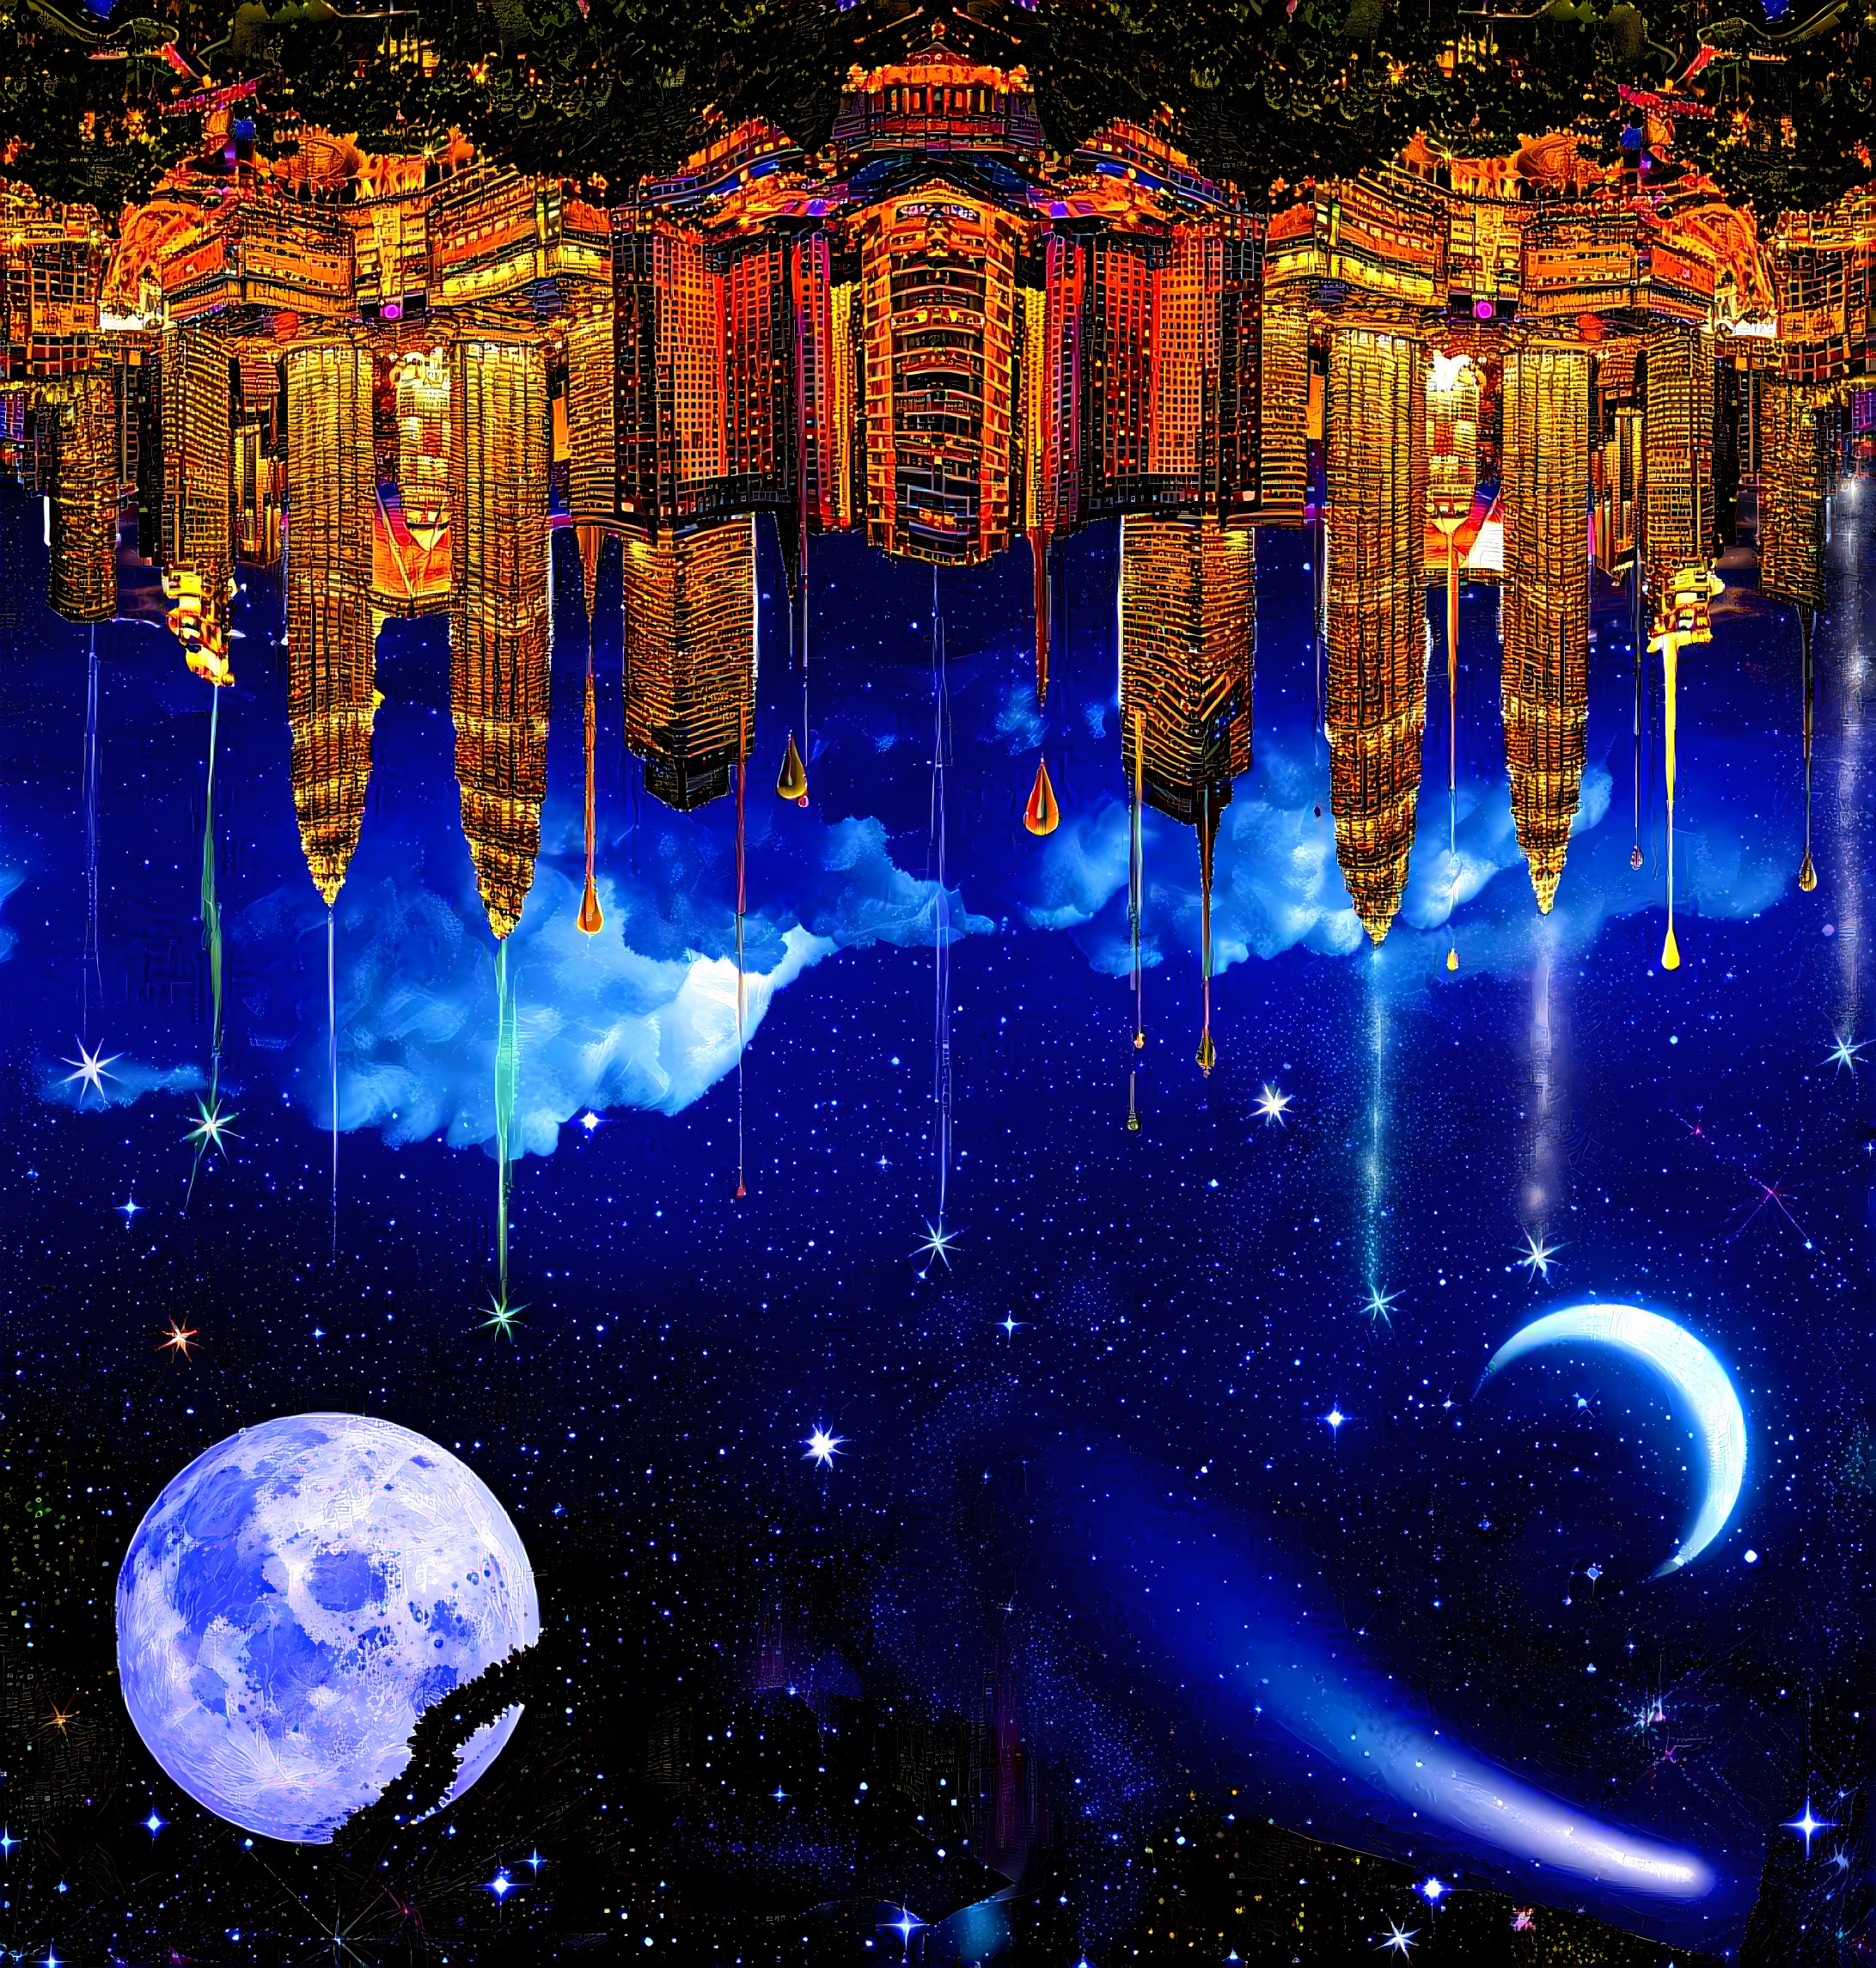 Petronas Towers in space fantasy collage